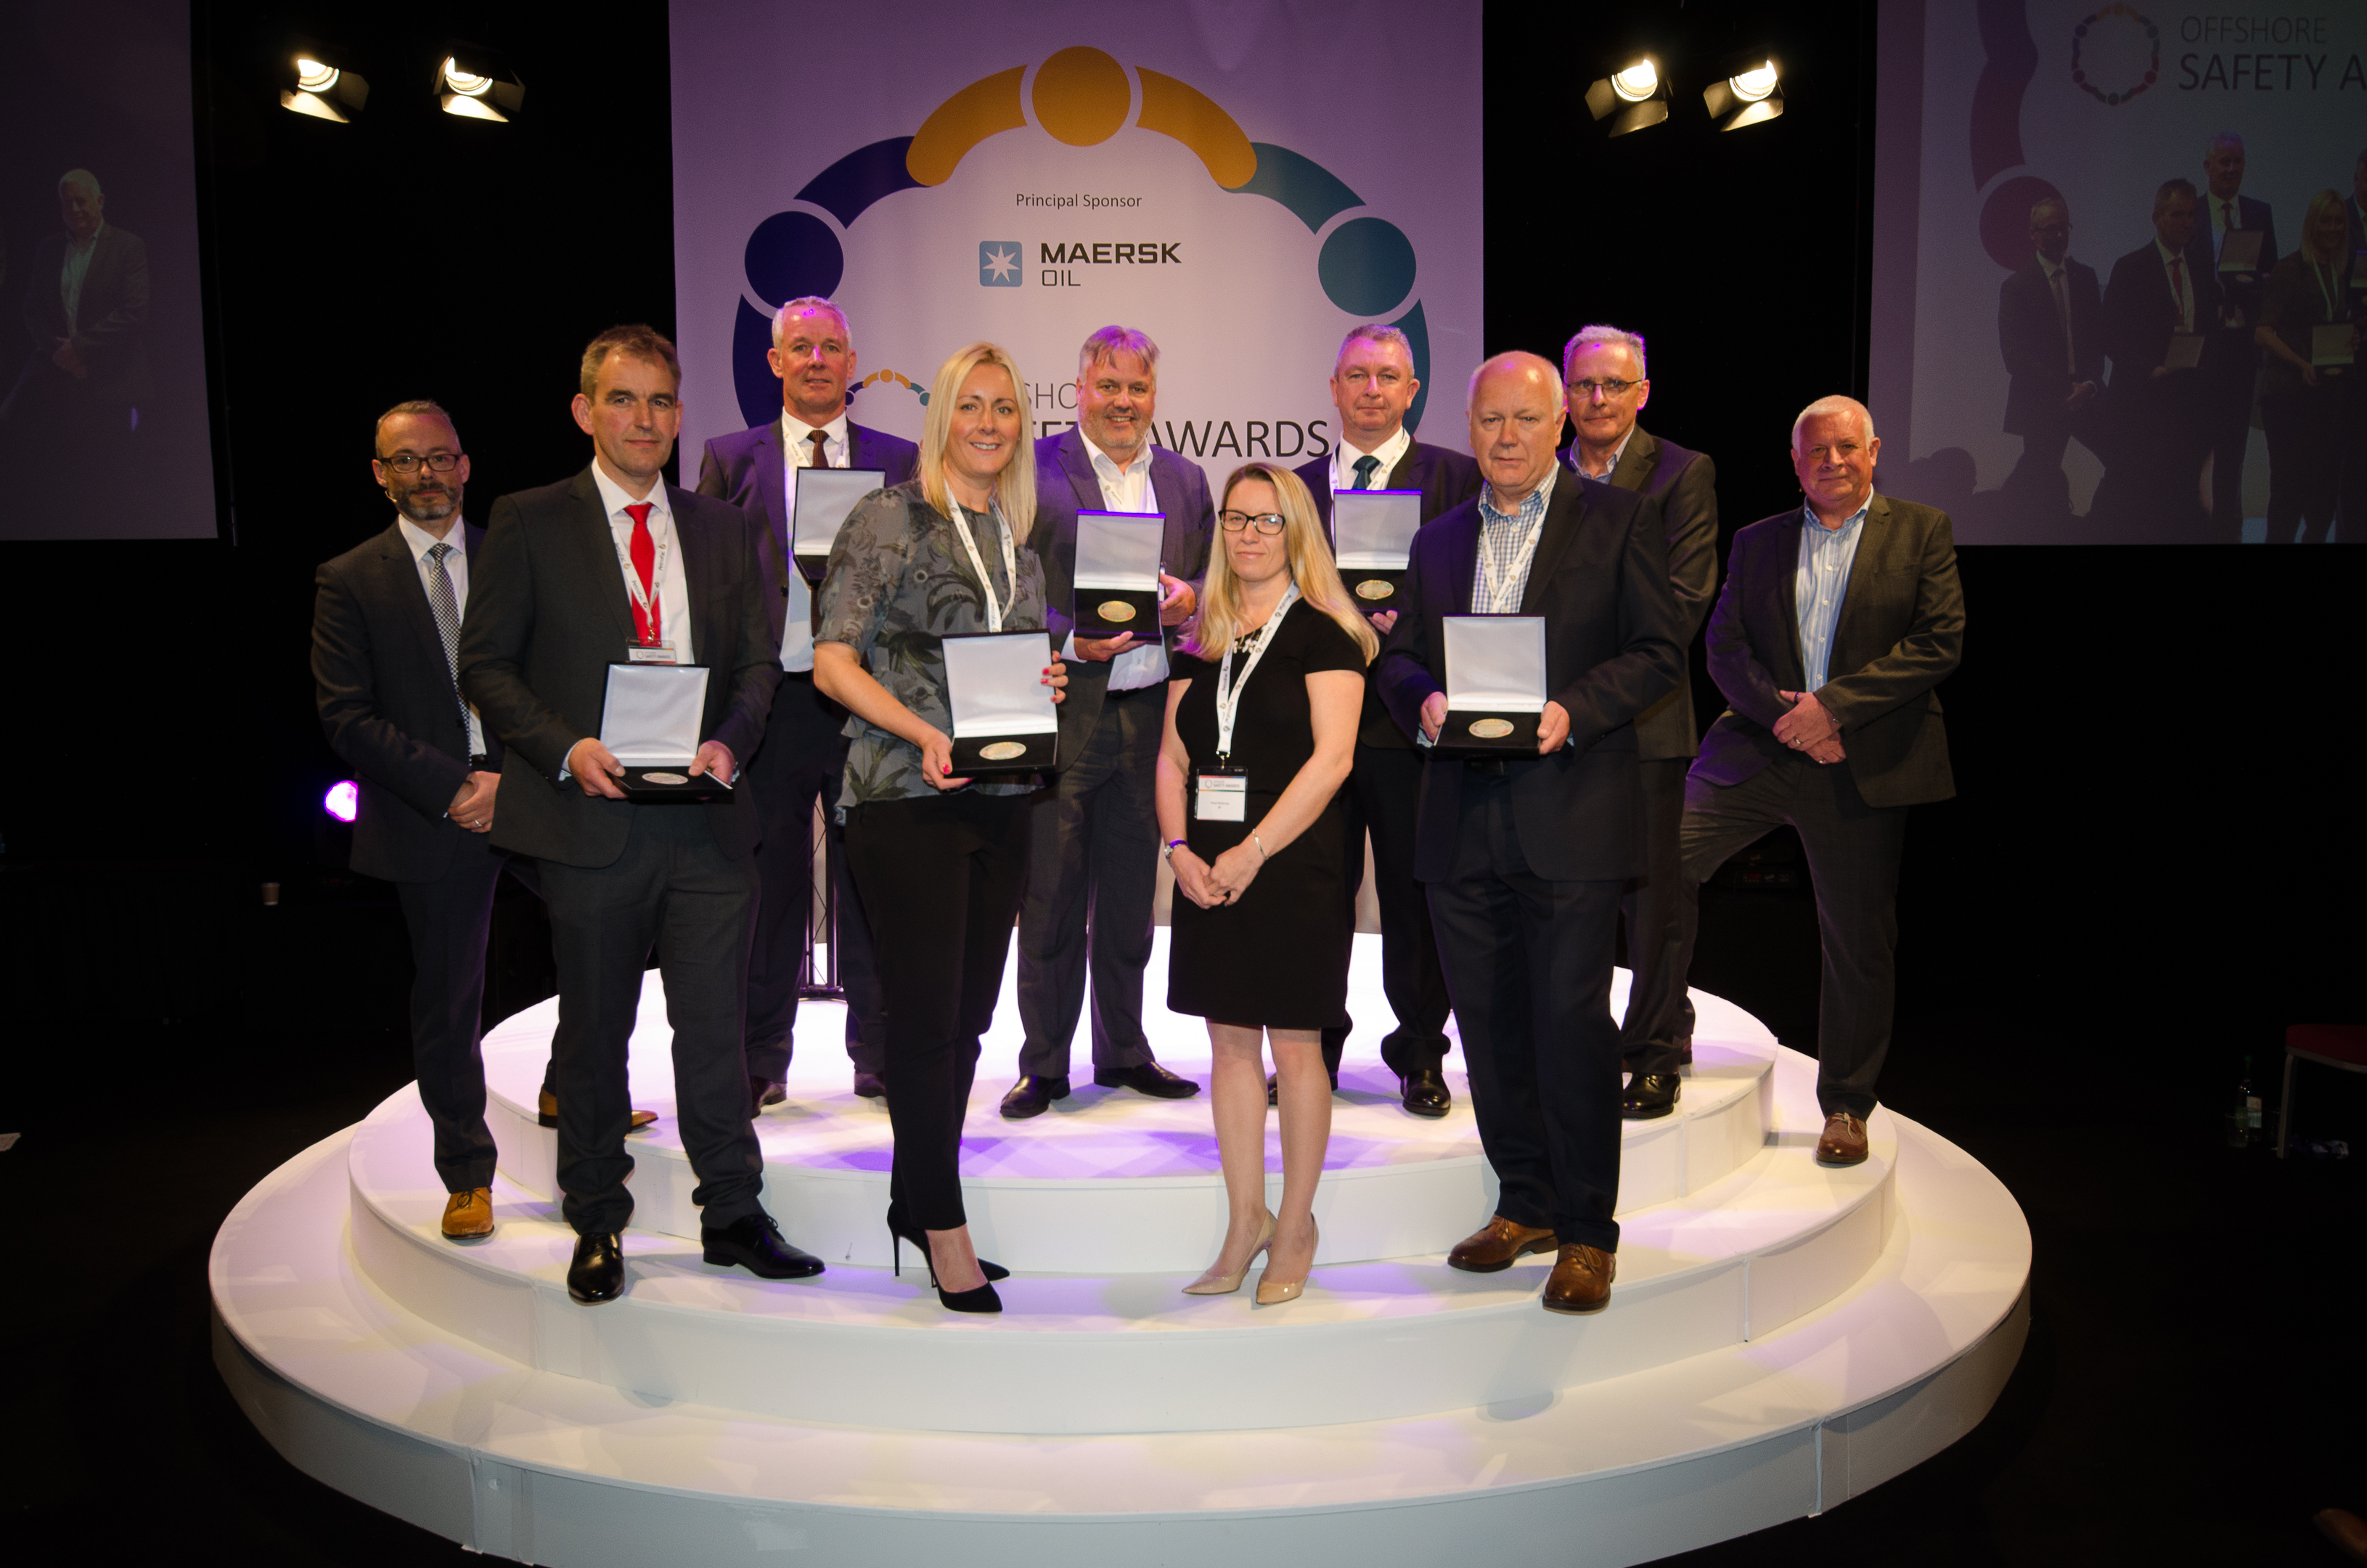 The winners of the Offshore Safety Awards in 2017